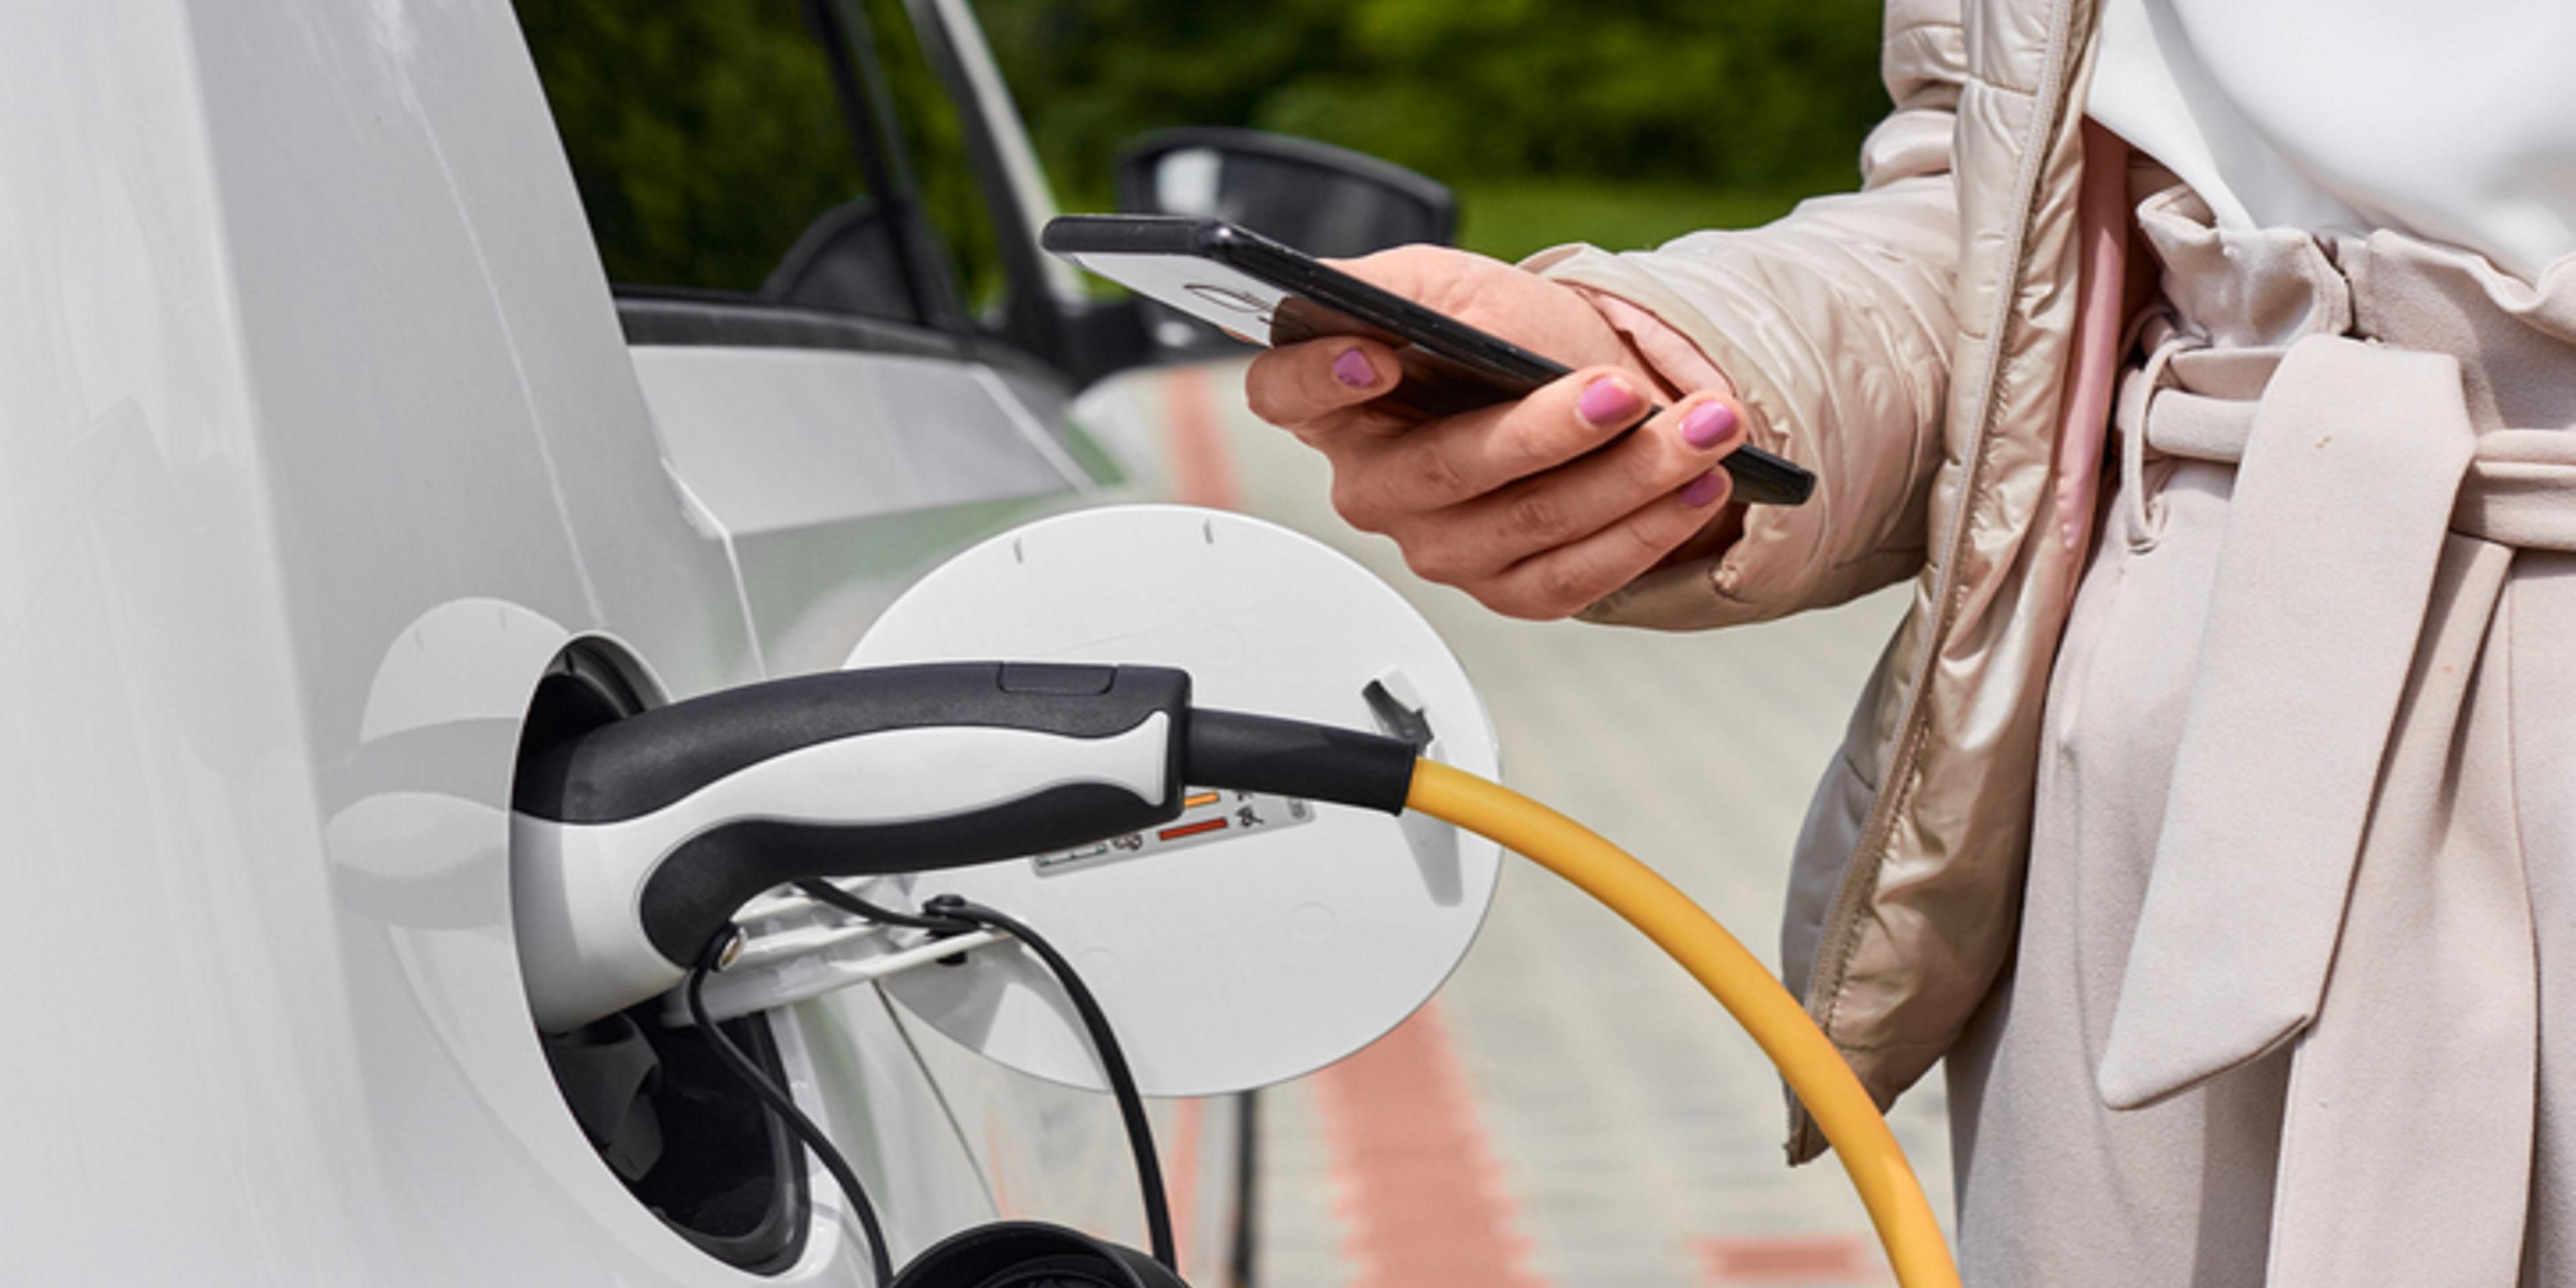 If you drive an electric vehicle, visit one of our convenient electronic charging stations during your stay. Please inquire about our charging fee.